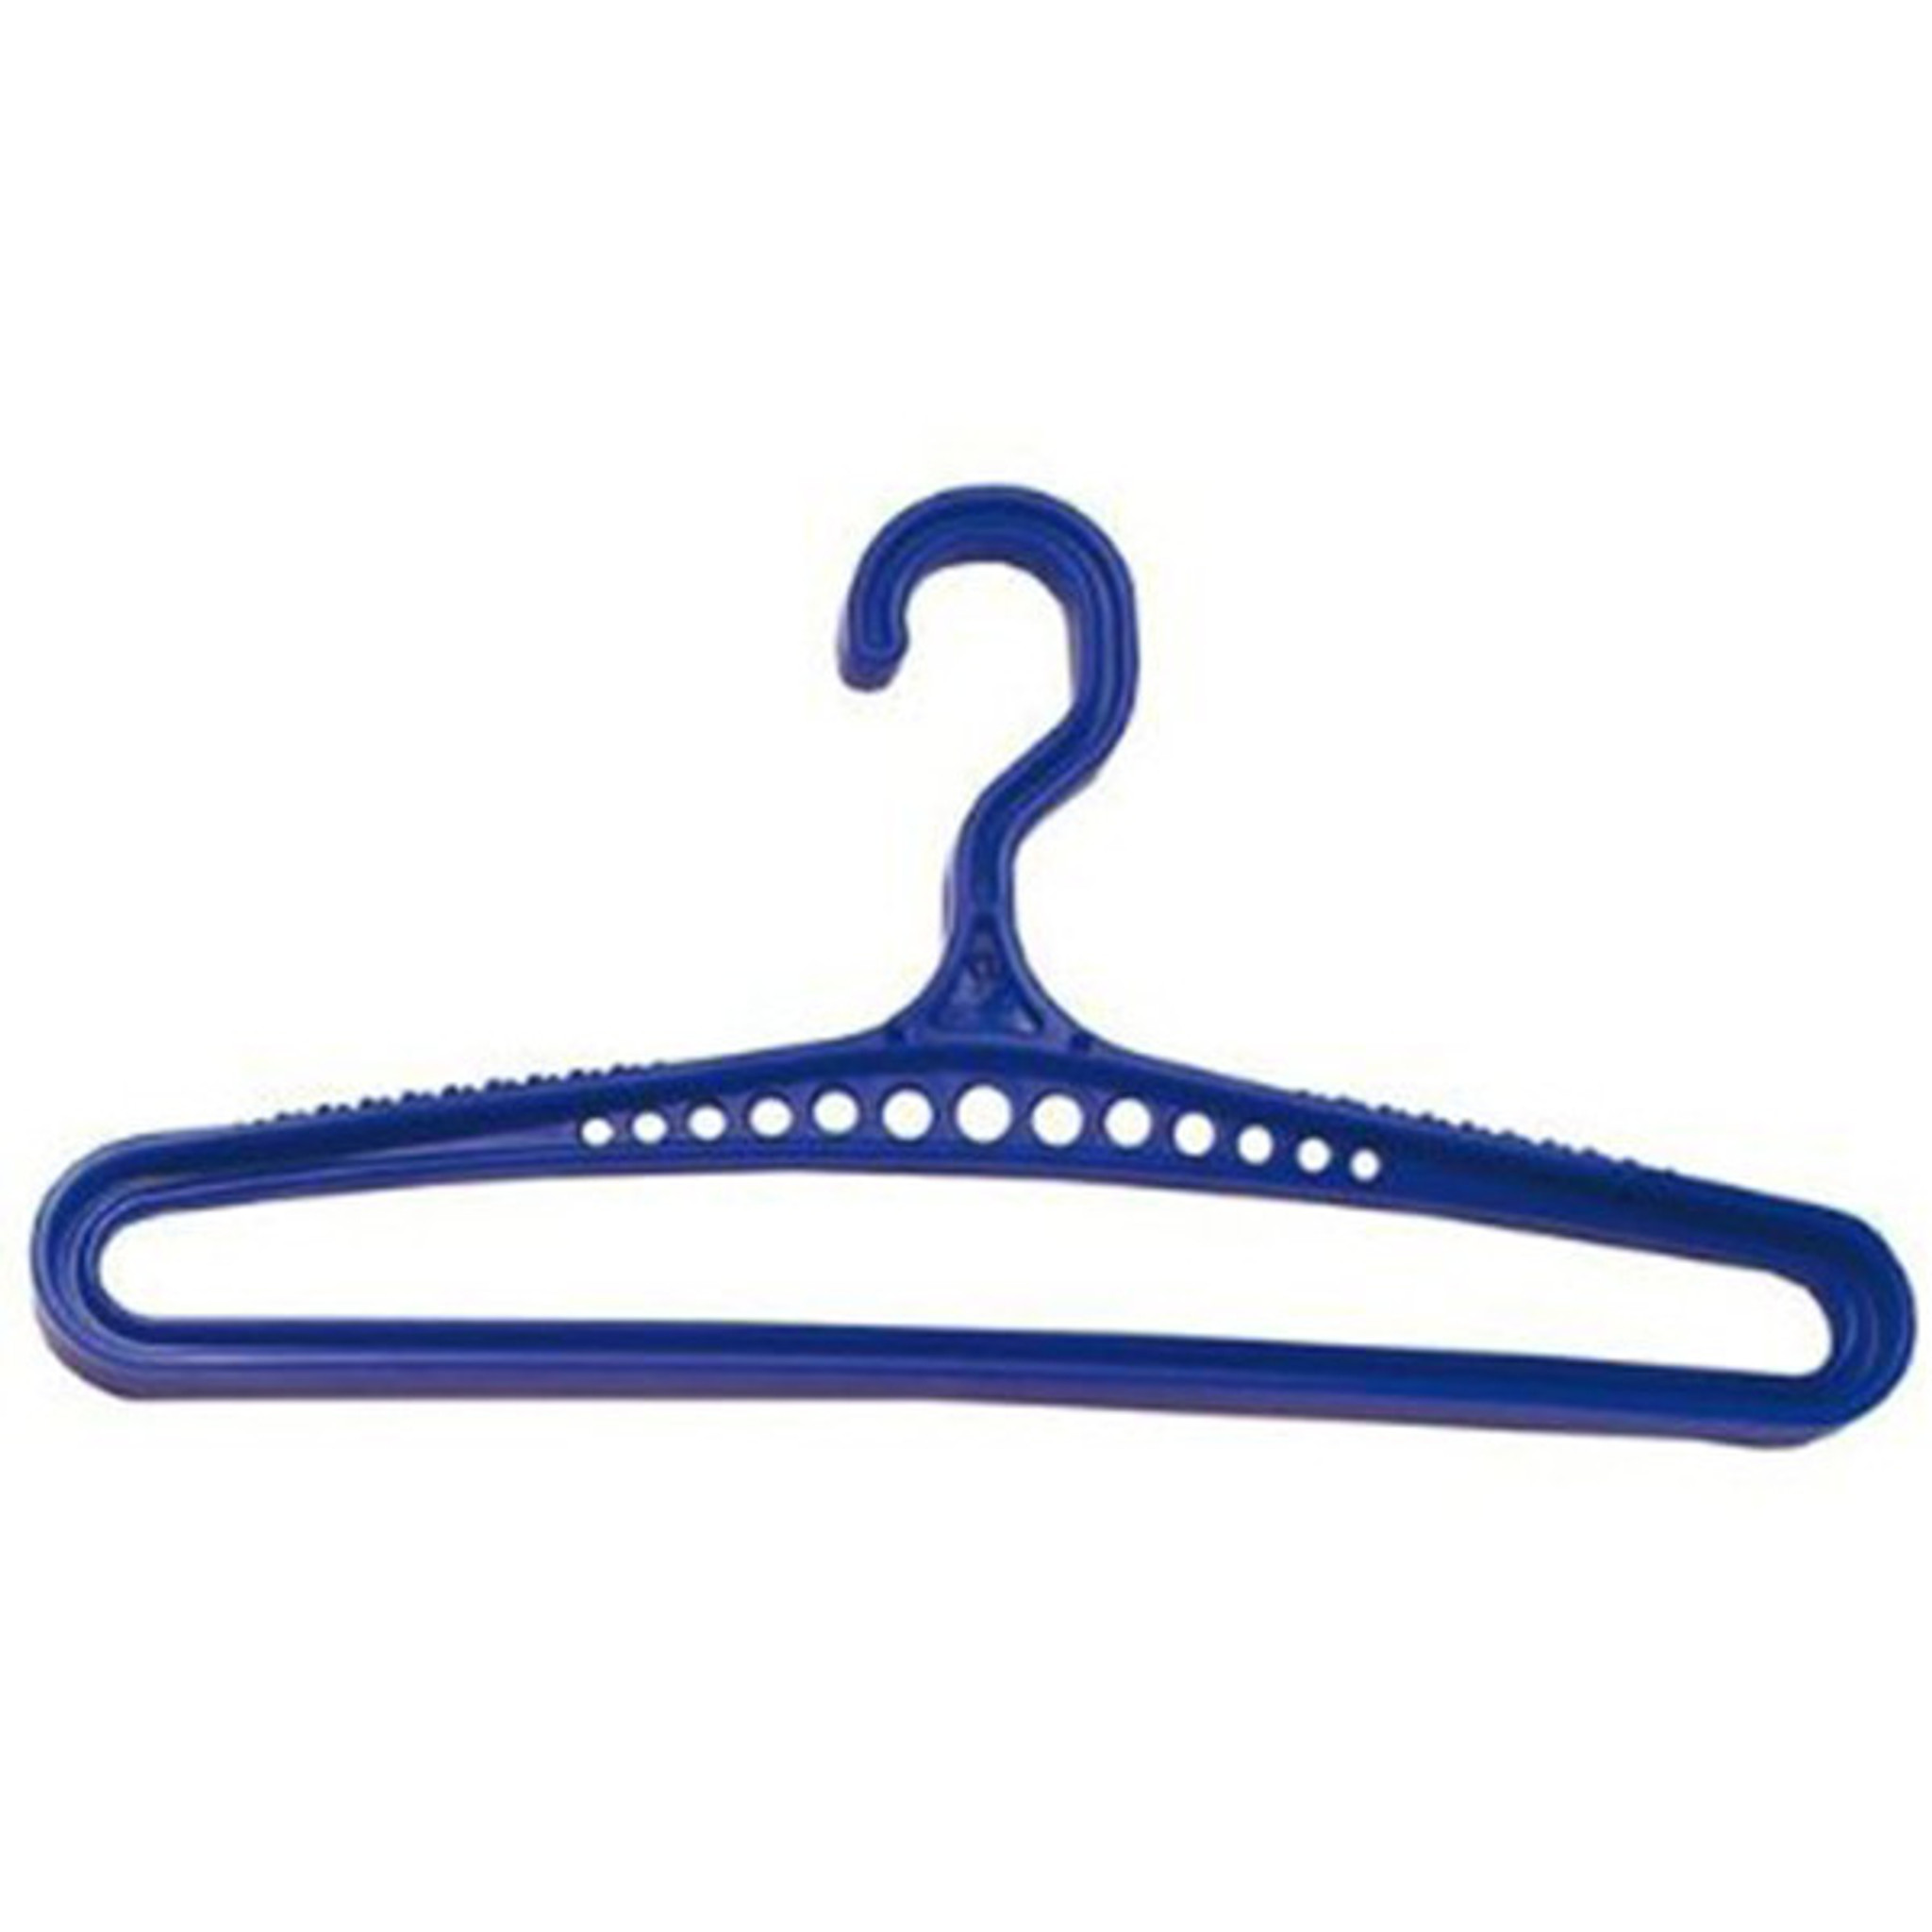 Hice Heavy Duty Standard Hanger | 150 lb Load Capacity | Durable High Impact Resin | for Heavy Gear, Wetsuits, Survival Equipment, Coats, Dress